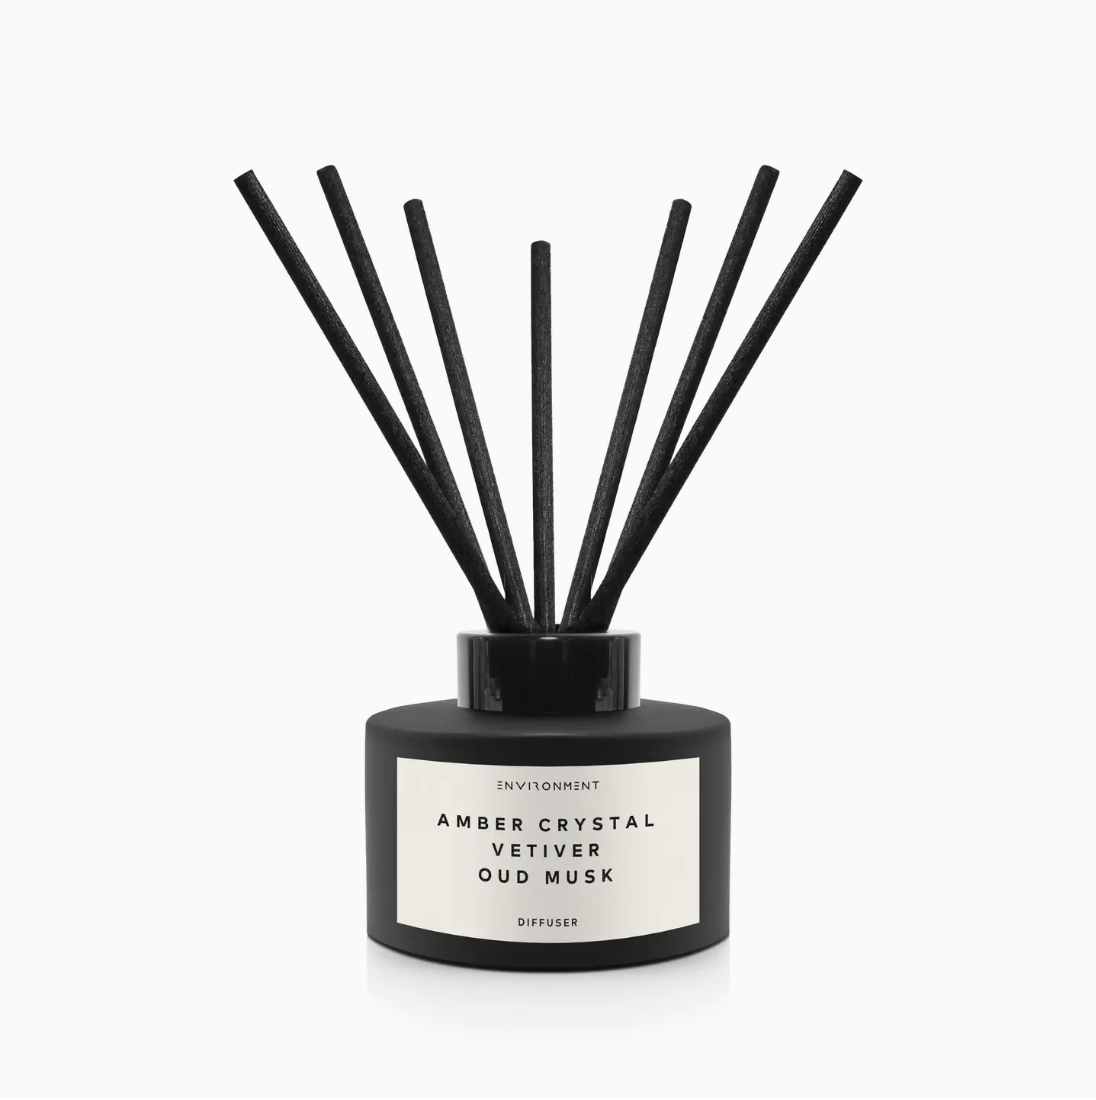 A black Faire aromatic diffuser with white text that reads &quot;Inspired By Baccarat Rouge 540® Diffuser Amber Crystal | Vet.&quot; It has several black sticks inserted into the square-shaped bottle, set against a white background.